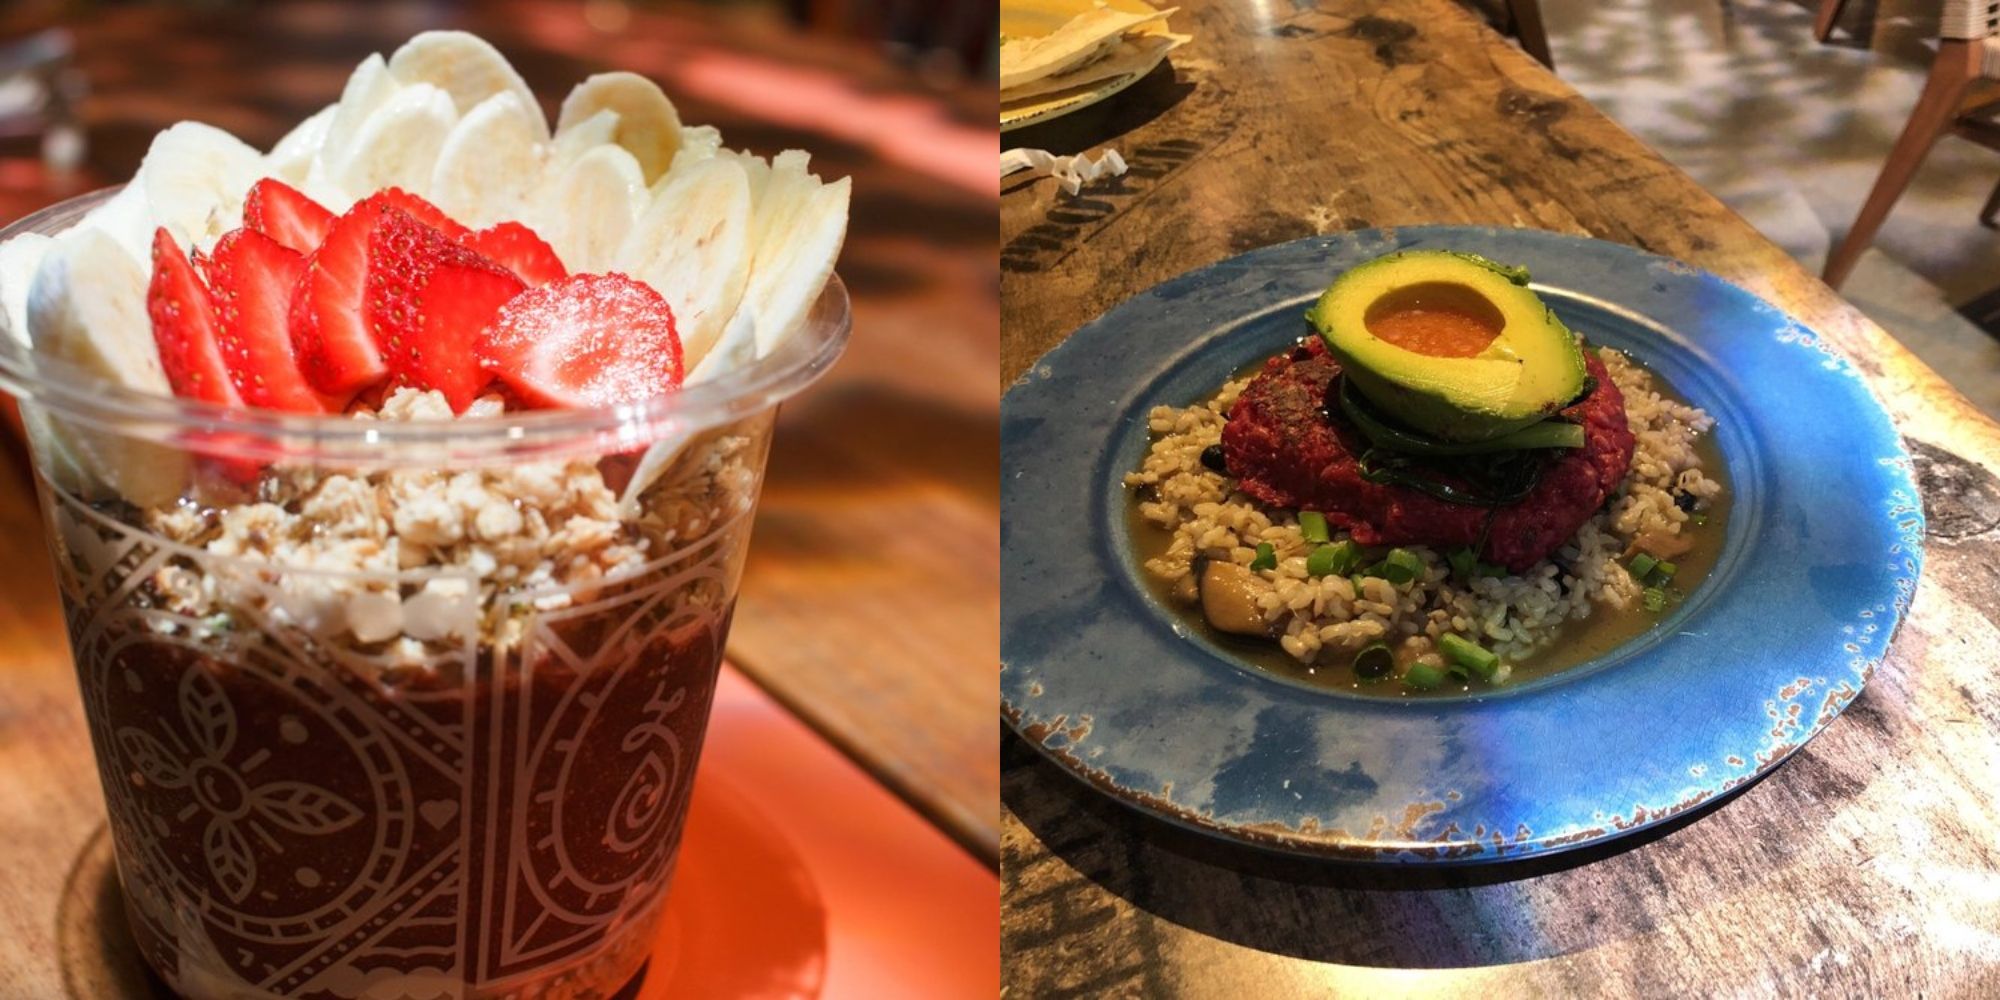 acail bowl with fruit and food on table